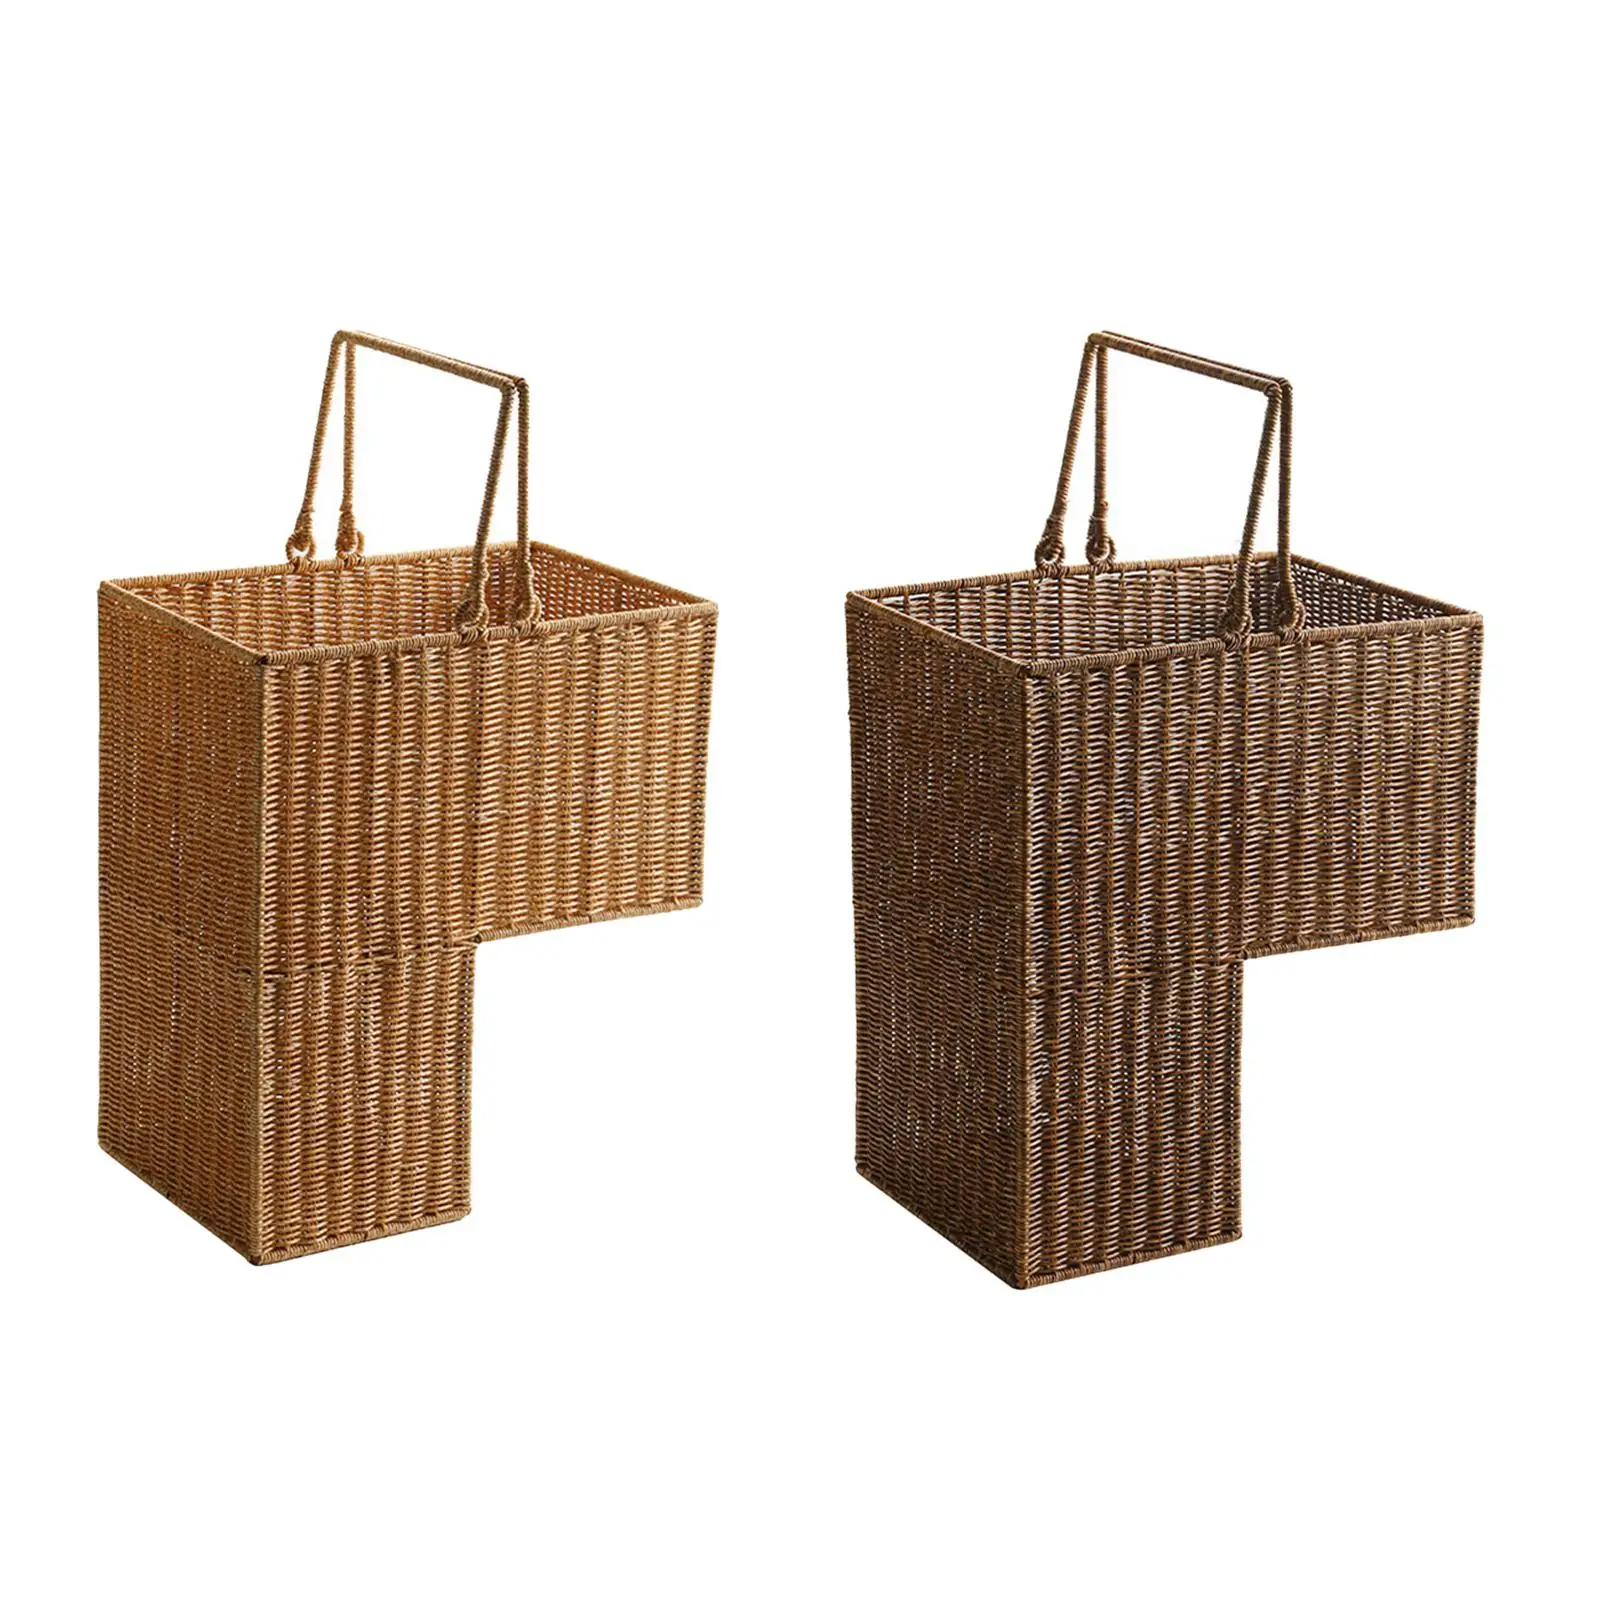 Stair Step Basket Handwoven Portable for Toiletries Sundries Magazines Home Decorative